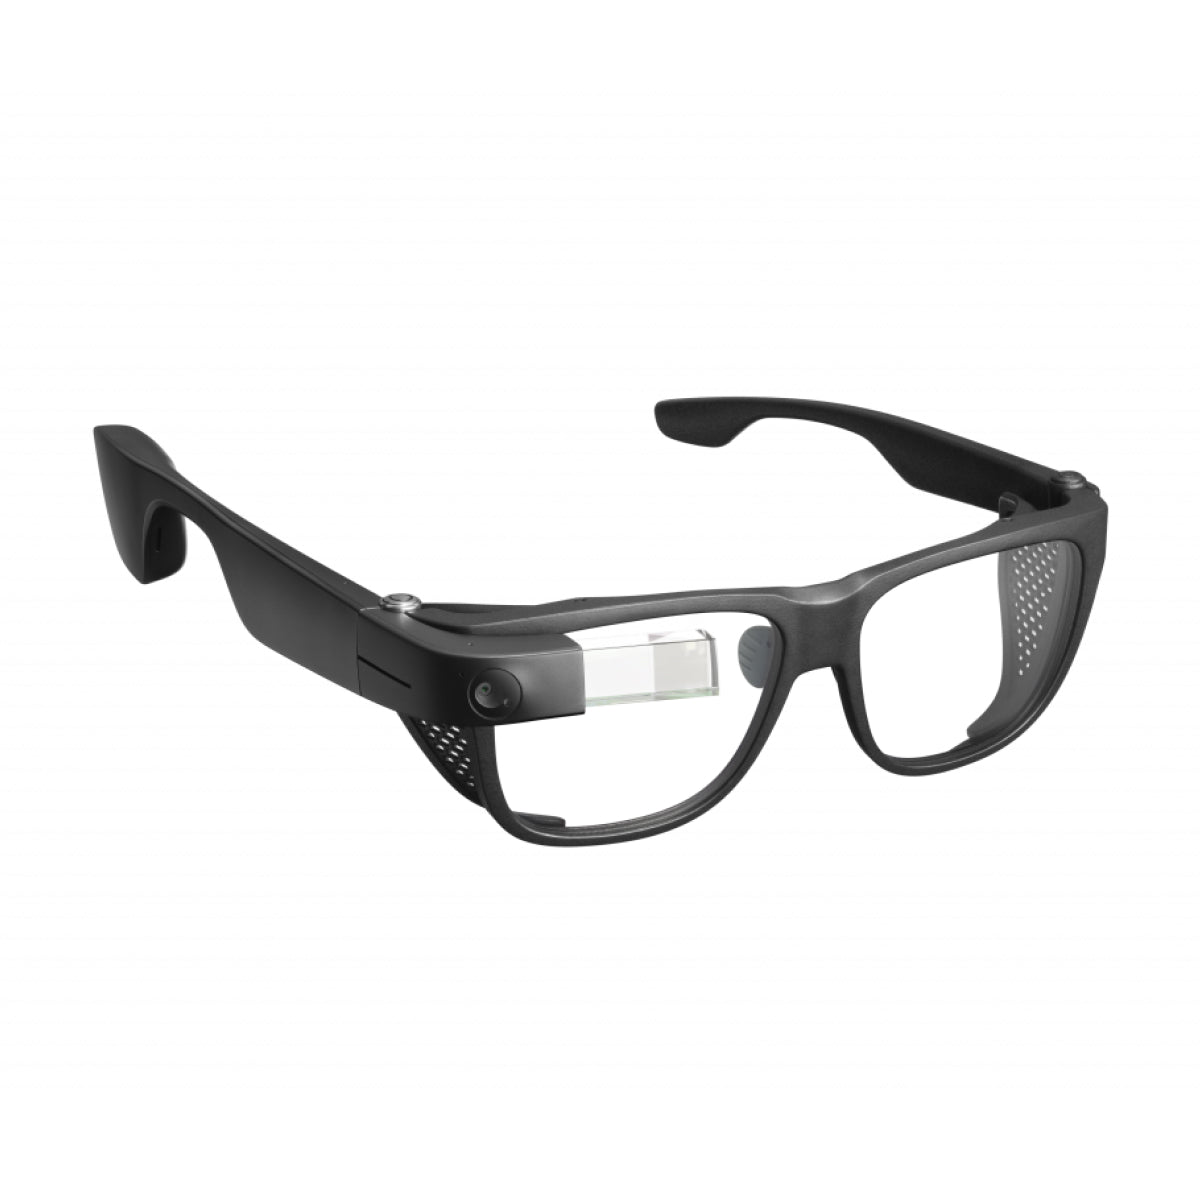 Photo of the Envision Glasses with the Smith Optics Frame (3/4 Top View)